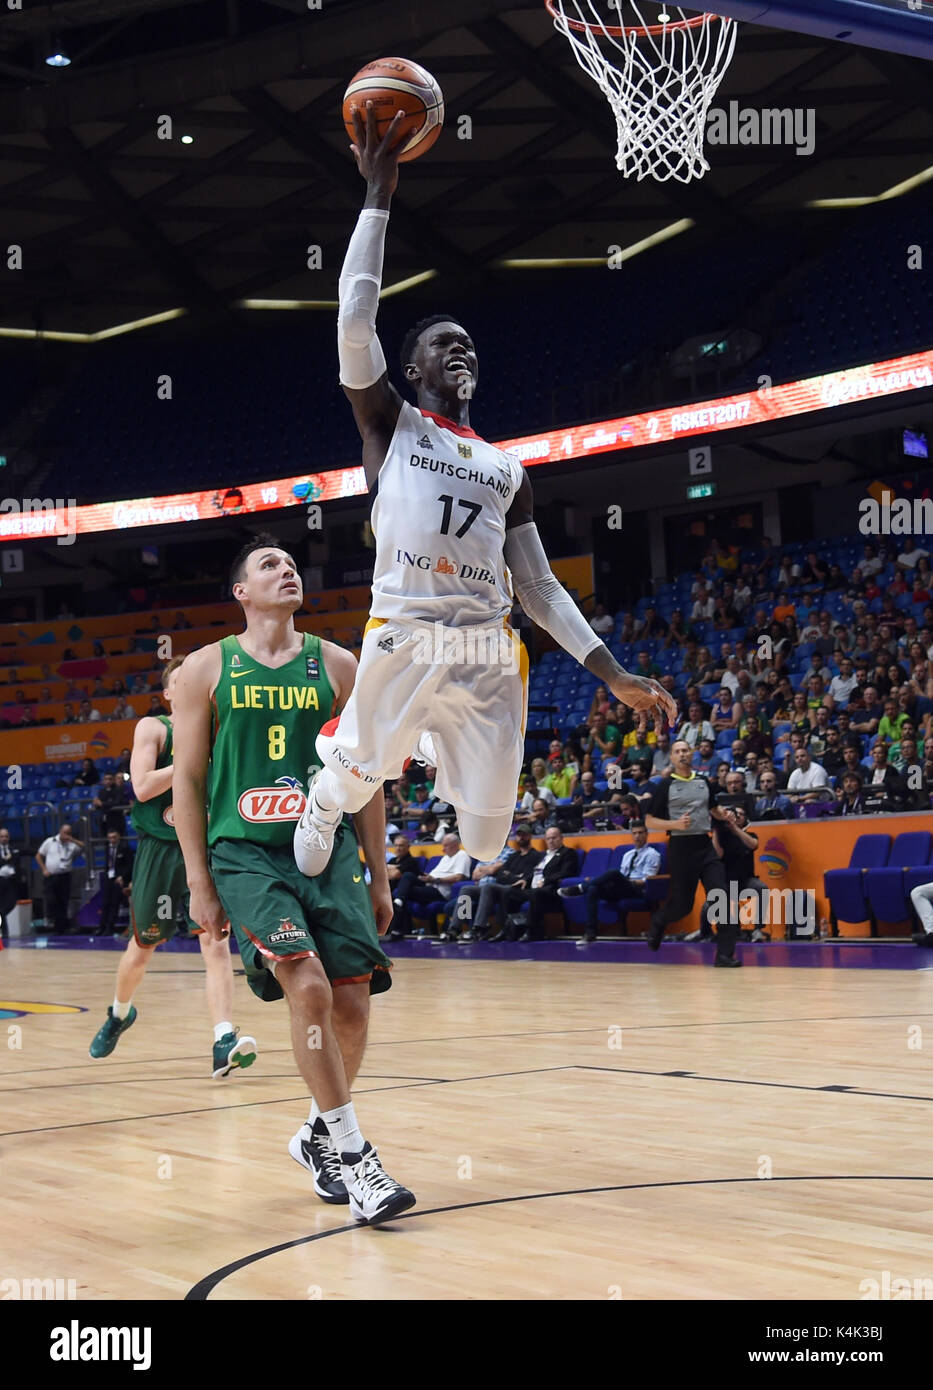 Tel Aviv, Israel. 6th Sep, 2017. Germany's Dennis Schroeder (R) in action against Lithuania's Jonas Maciulis during the Group B group stage EuroBasket championship basketball match between Lithuania and Germany in the Tel Aviv Arena in Tel Aviv, Israel, 6 September 2017. Photo: Berney Ardov/dpa/Alamy Live News Stock Photo